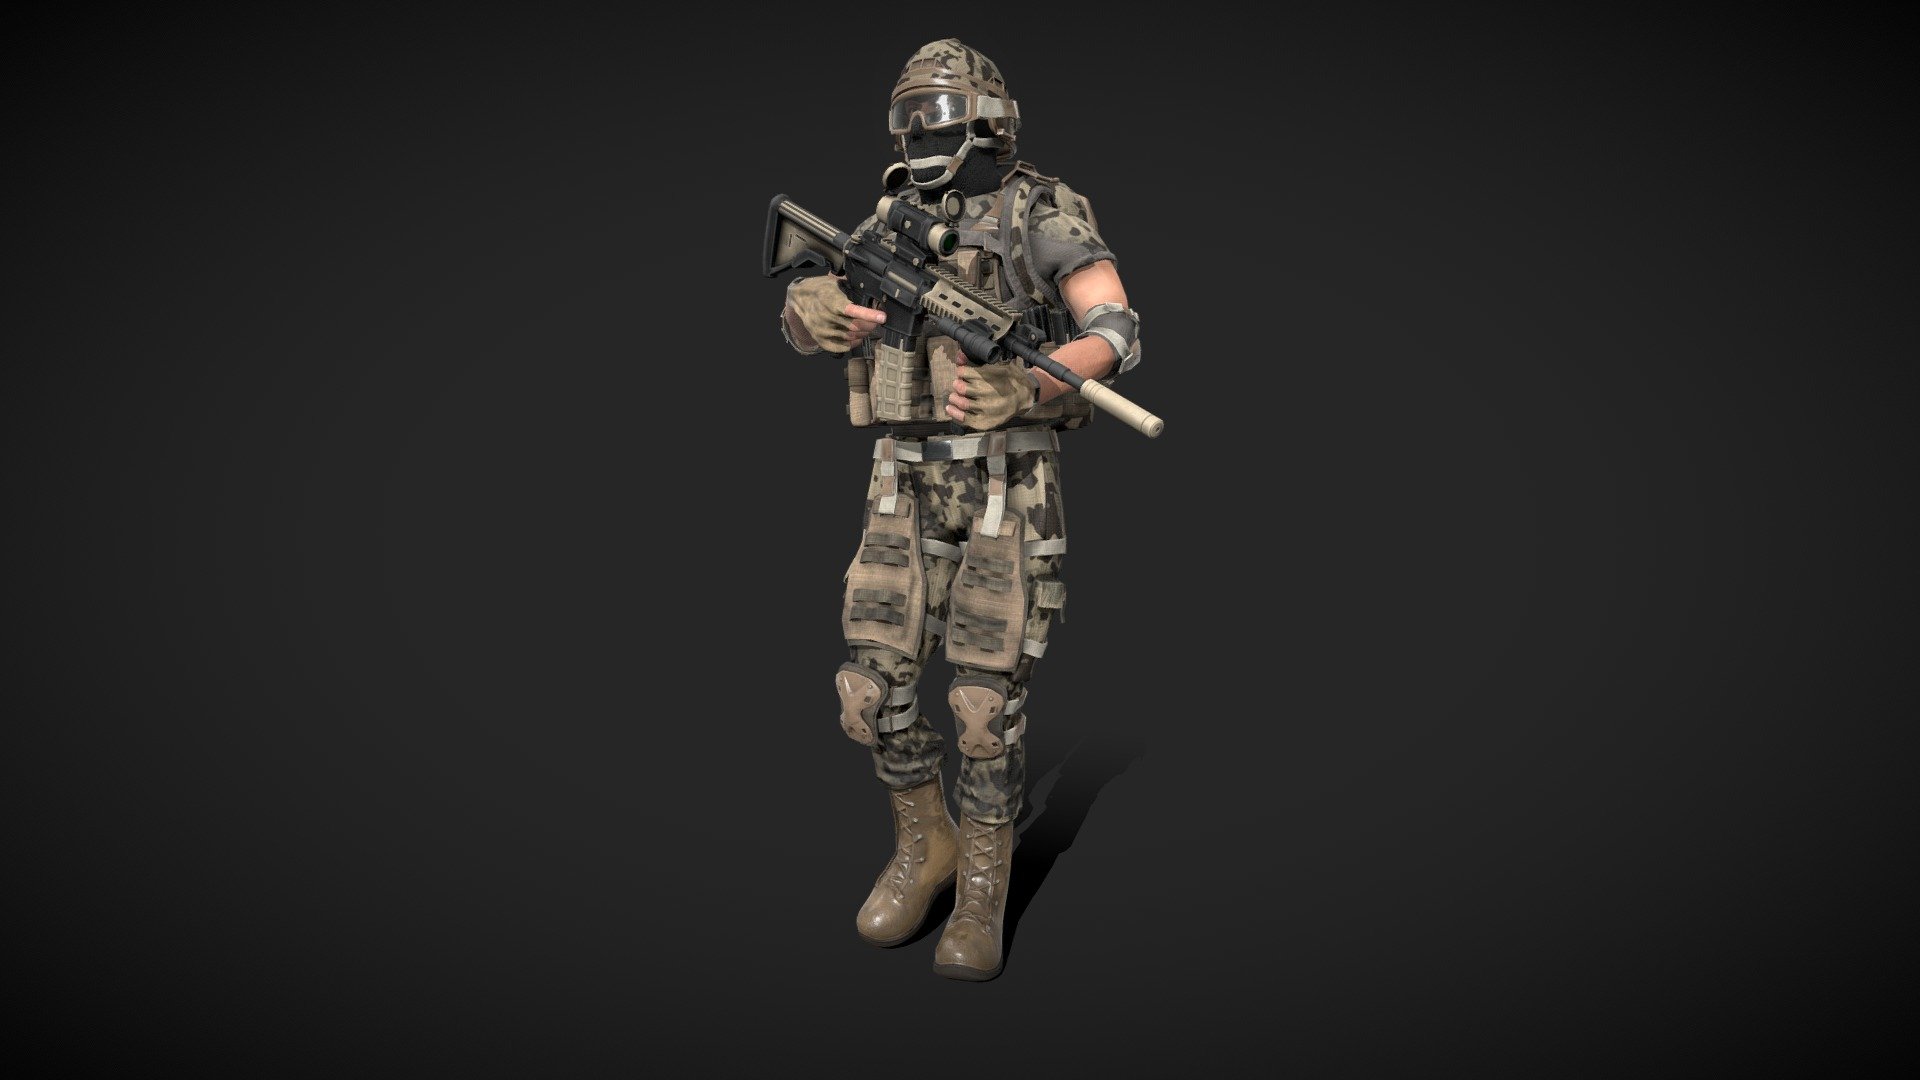 Weapon and Armor - Blender with Addons, Substance Painter, Photoshop.

Human body - Character Creator 4

Soldier used in UE5 animation - https://www.artstation.com/artwork/zPkJG4 - US Marine Soldier - Buy Royalty Free 3D model by DrastrArt (@ondrej.streit) 3d model